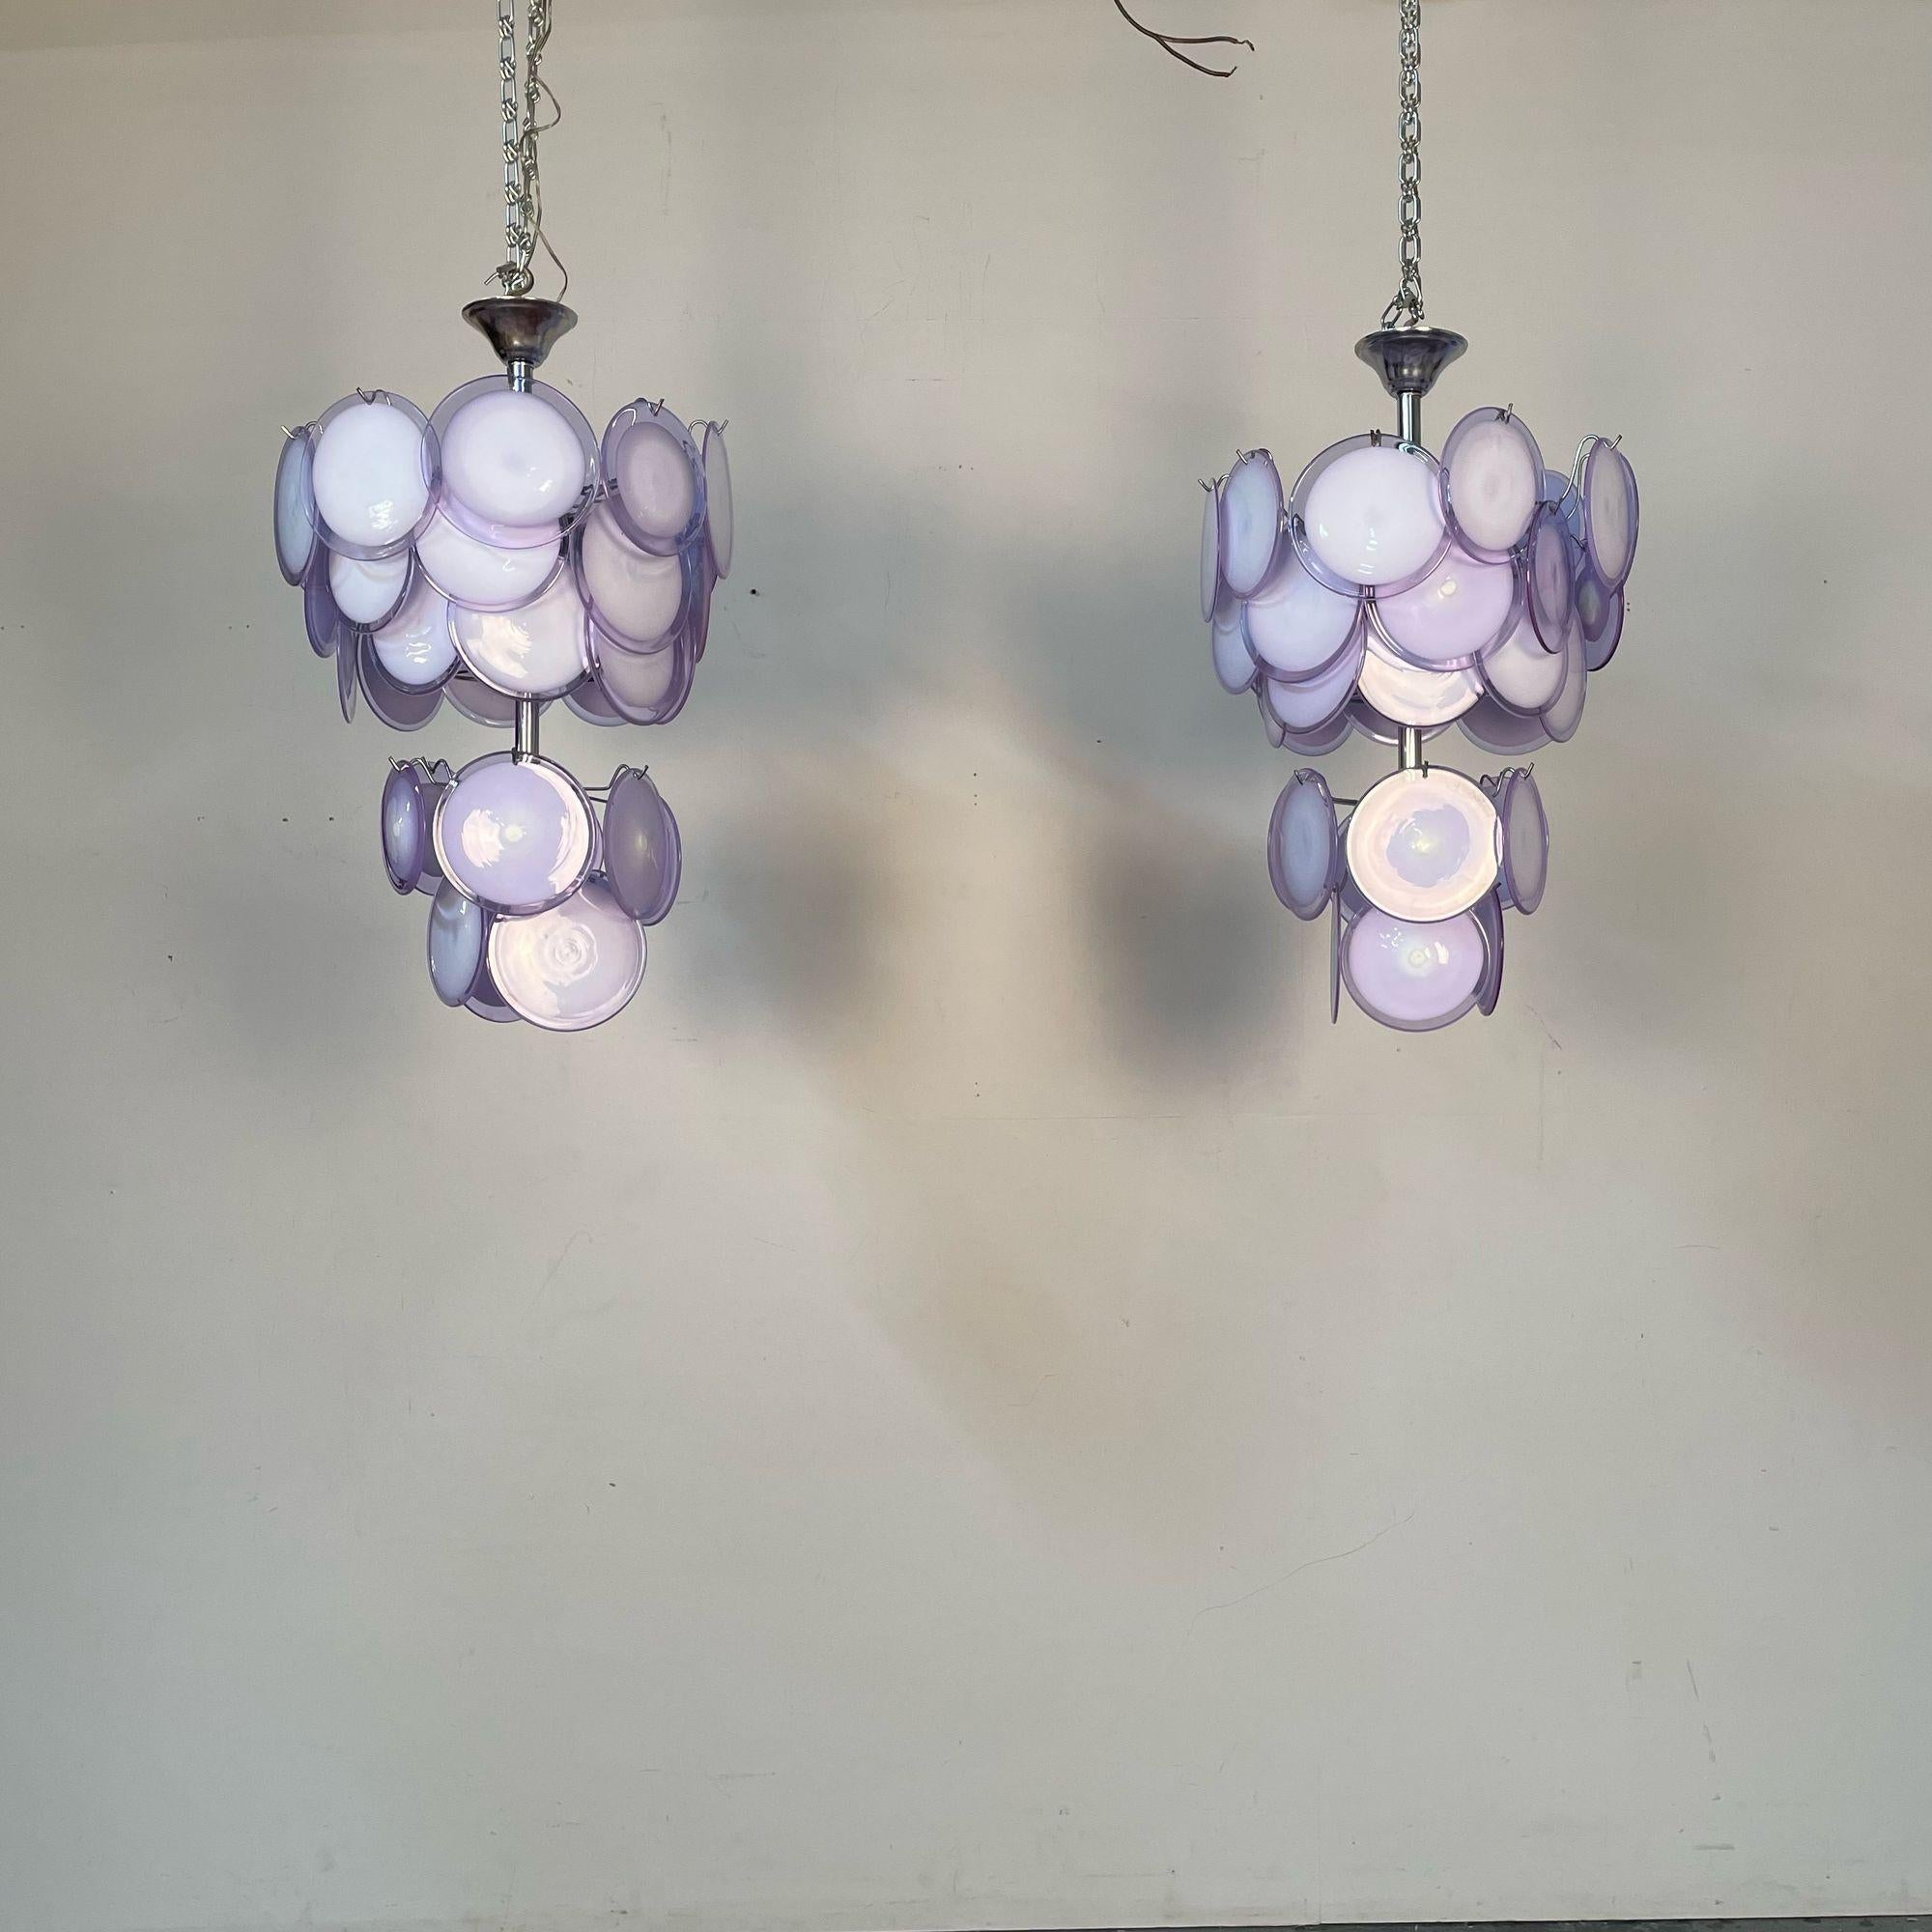 Mid-20th Century Pair of Mid-Century Modern Style Purple Murano Glass Disk Chandeliers For Sale